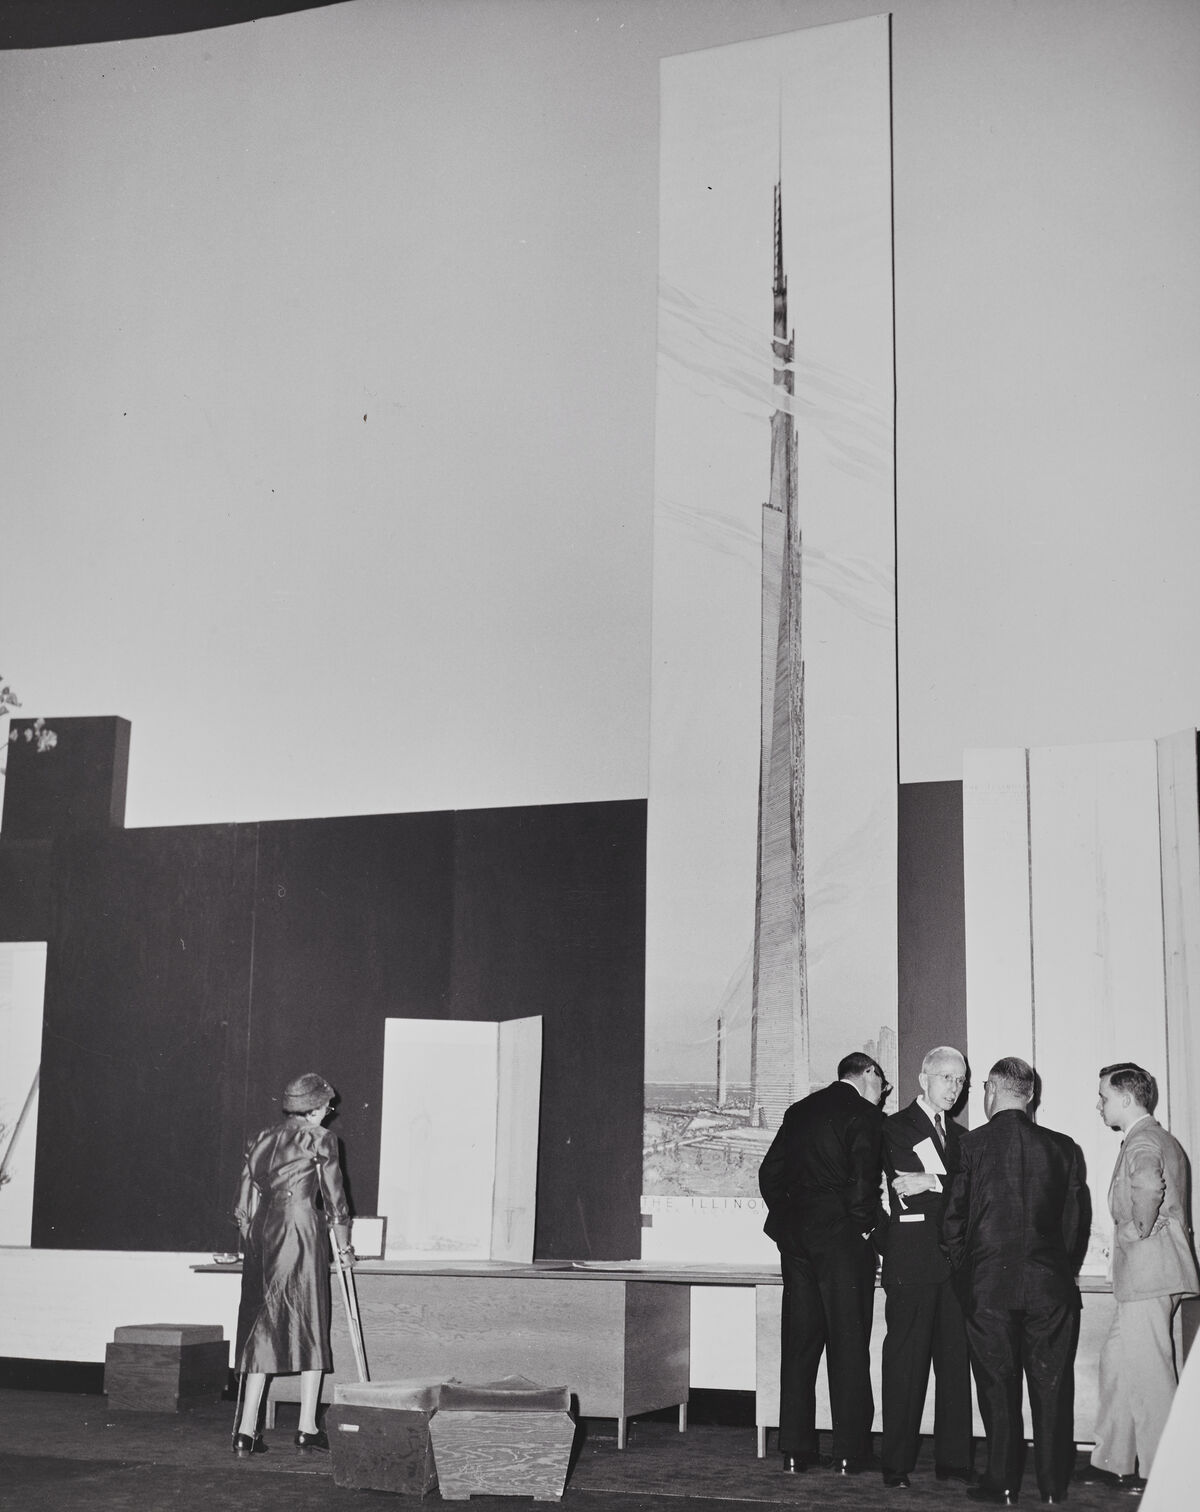 Unveiling the 22-foot-high (6.7-meter-high) visualization of The Mile-High Illinois at the October 16, 1956, press conference in Chicago. Courtesy of the Frank Lloyd Wright (the Museum of Modern Art | Avery Architectural &amp; Fine Arts Library, Columbia University, New York).